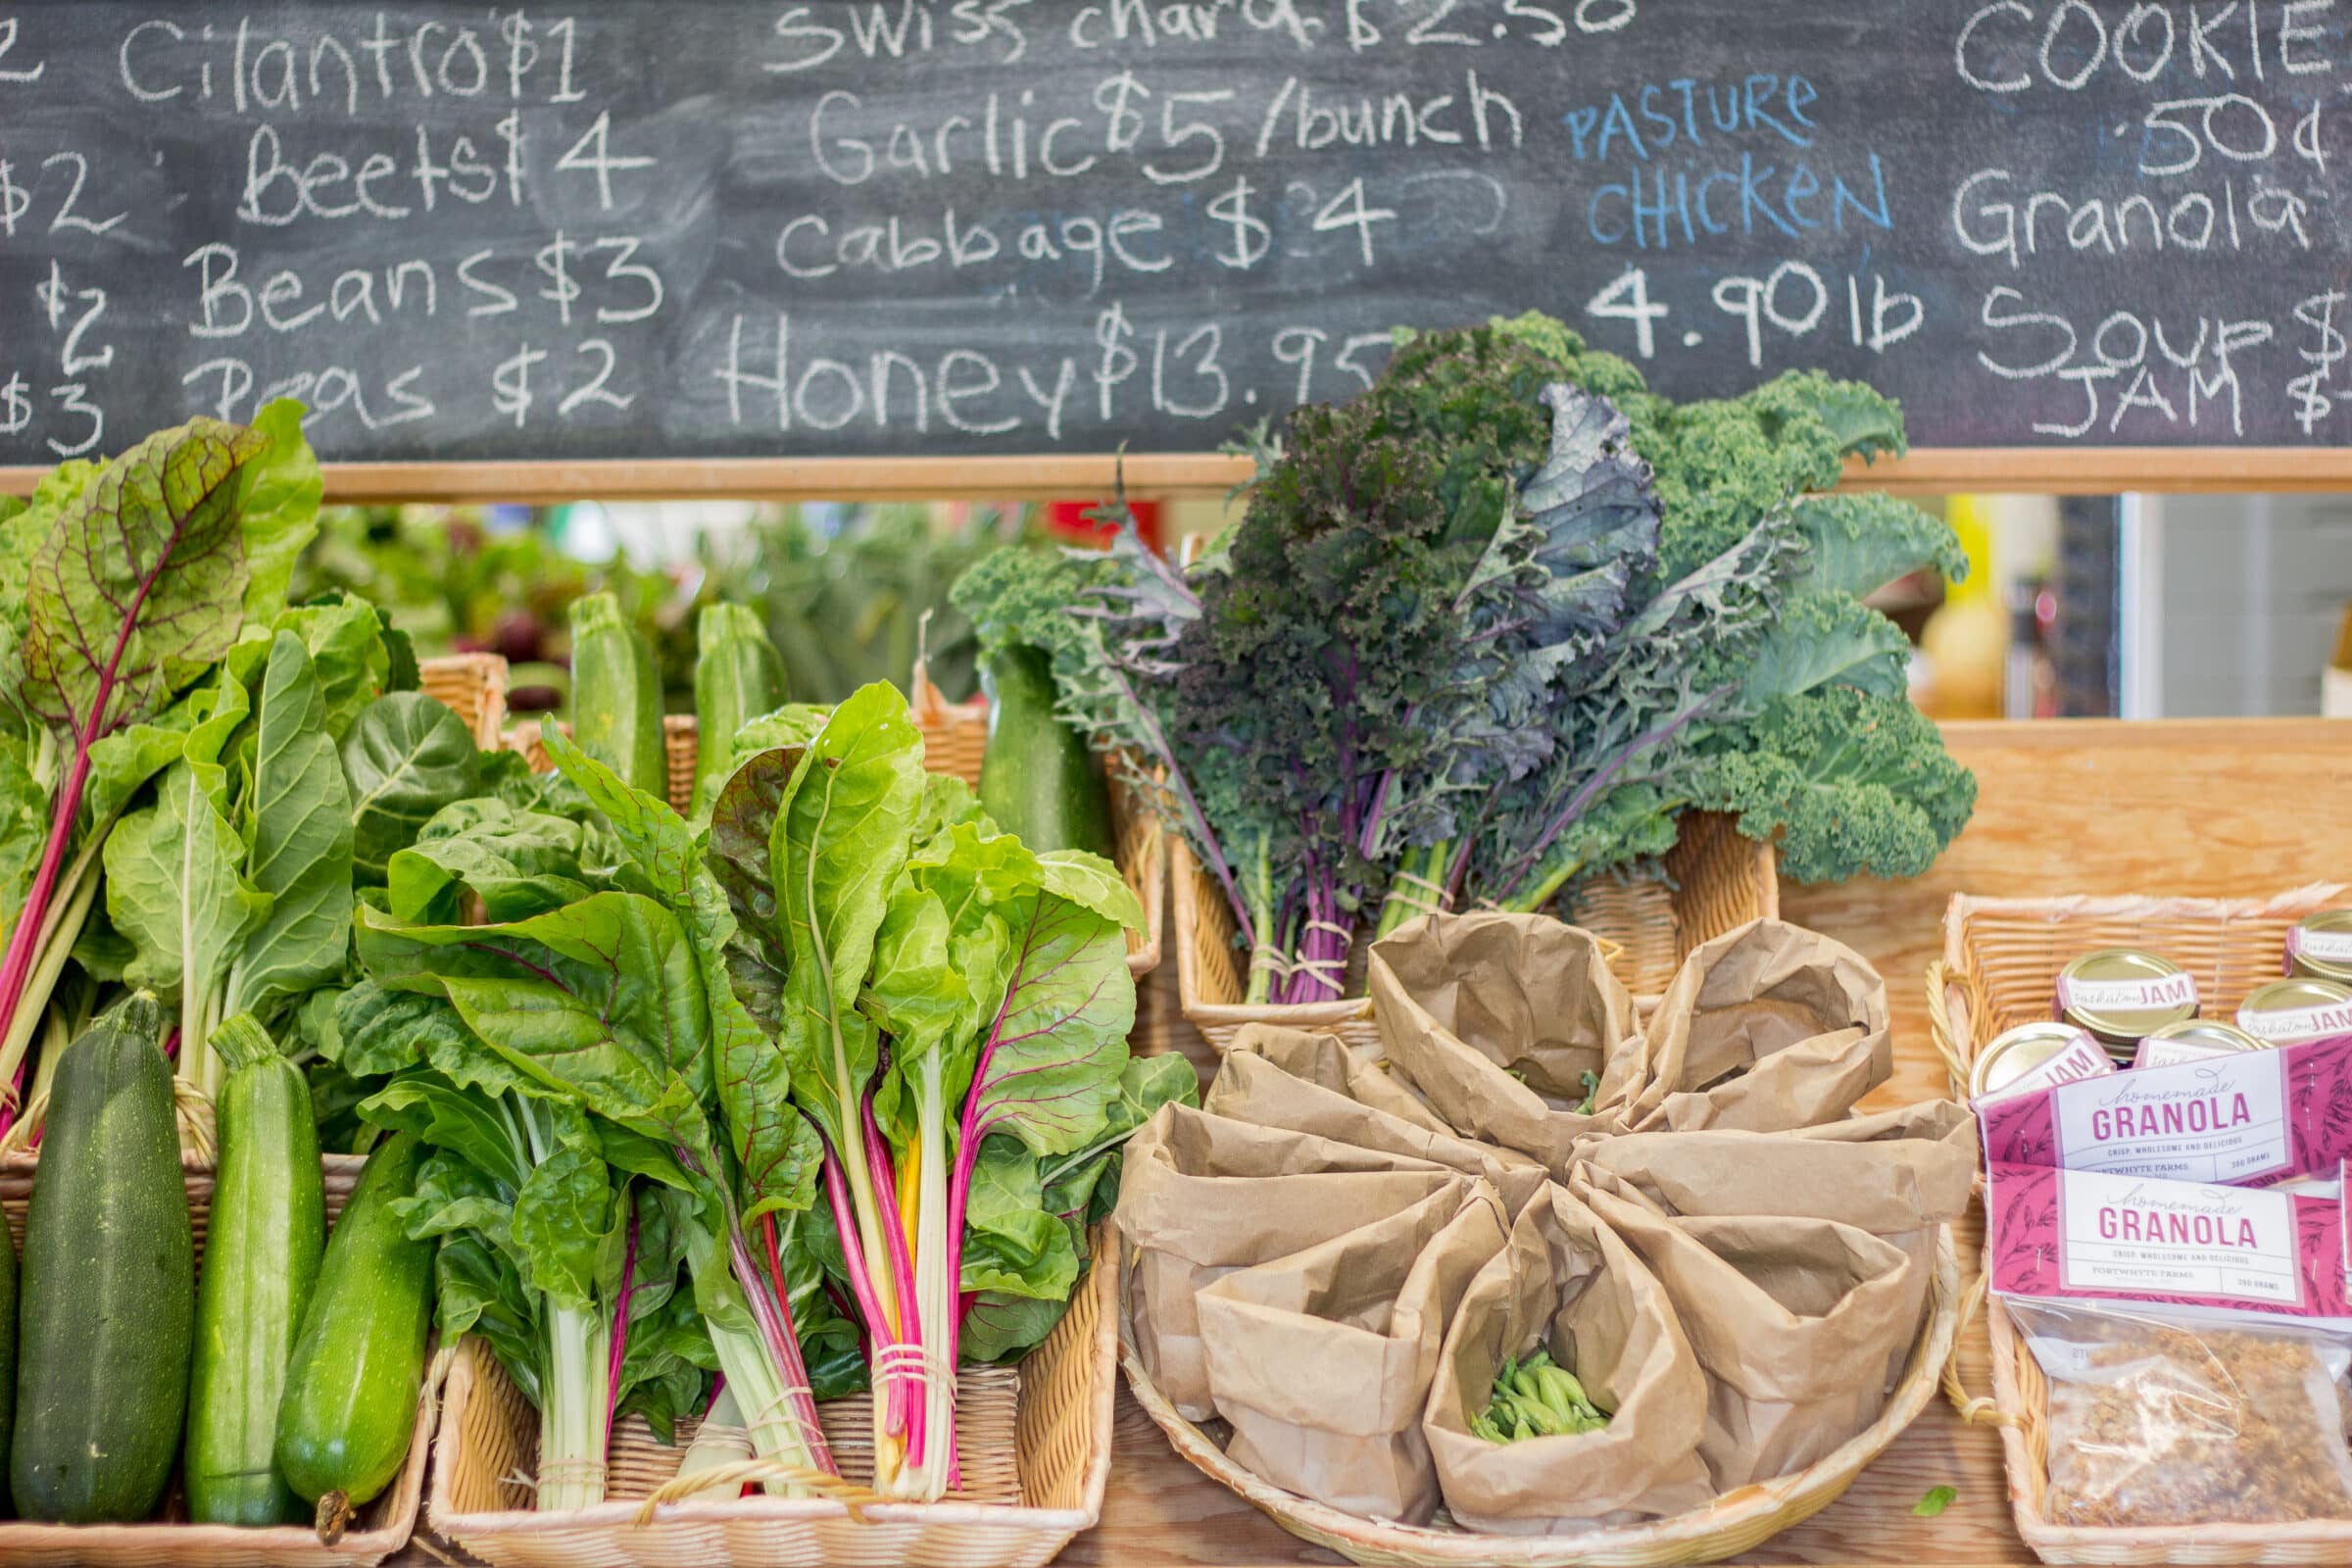 Assortment of green vegetables in baskets in front of chalkboard with price list.